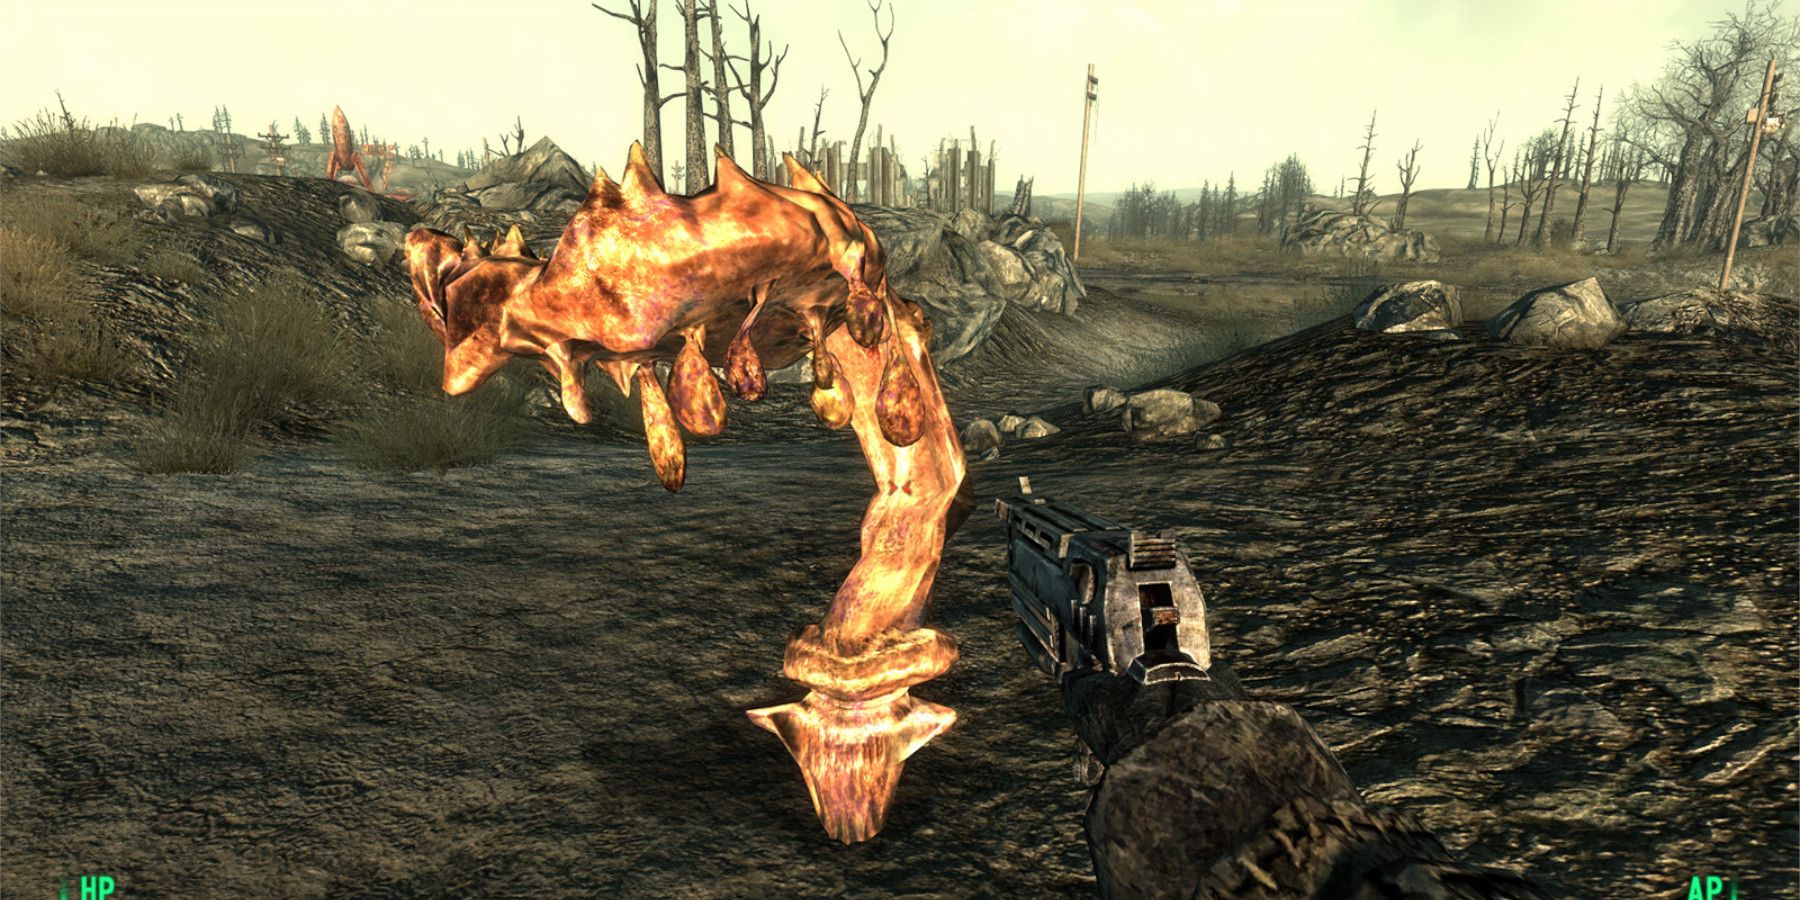 You really don't need mods to make Fallout 3 gloriously weird : r/Fallout